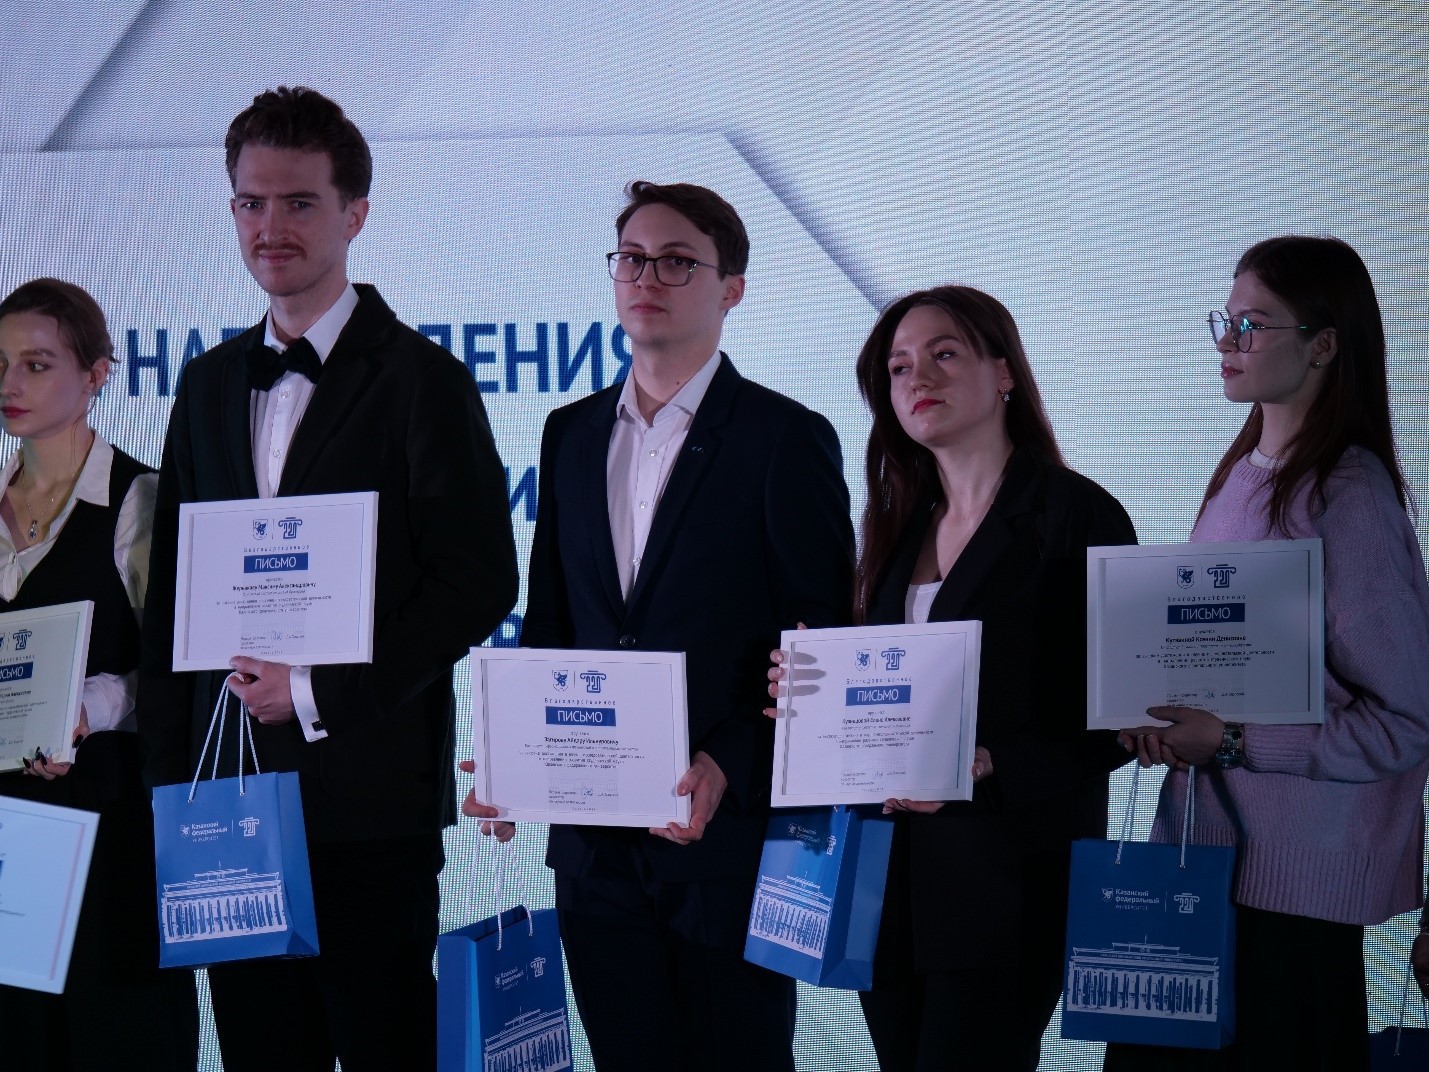 Laboratory of Intelligent Robotics Systems' members were awarded for their achievements in science